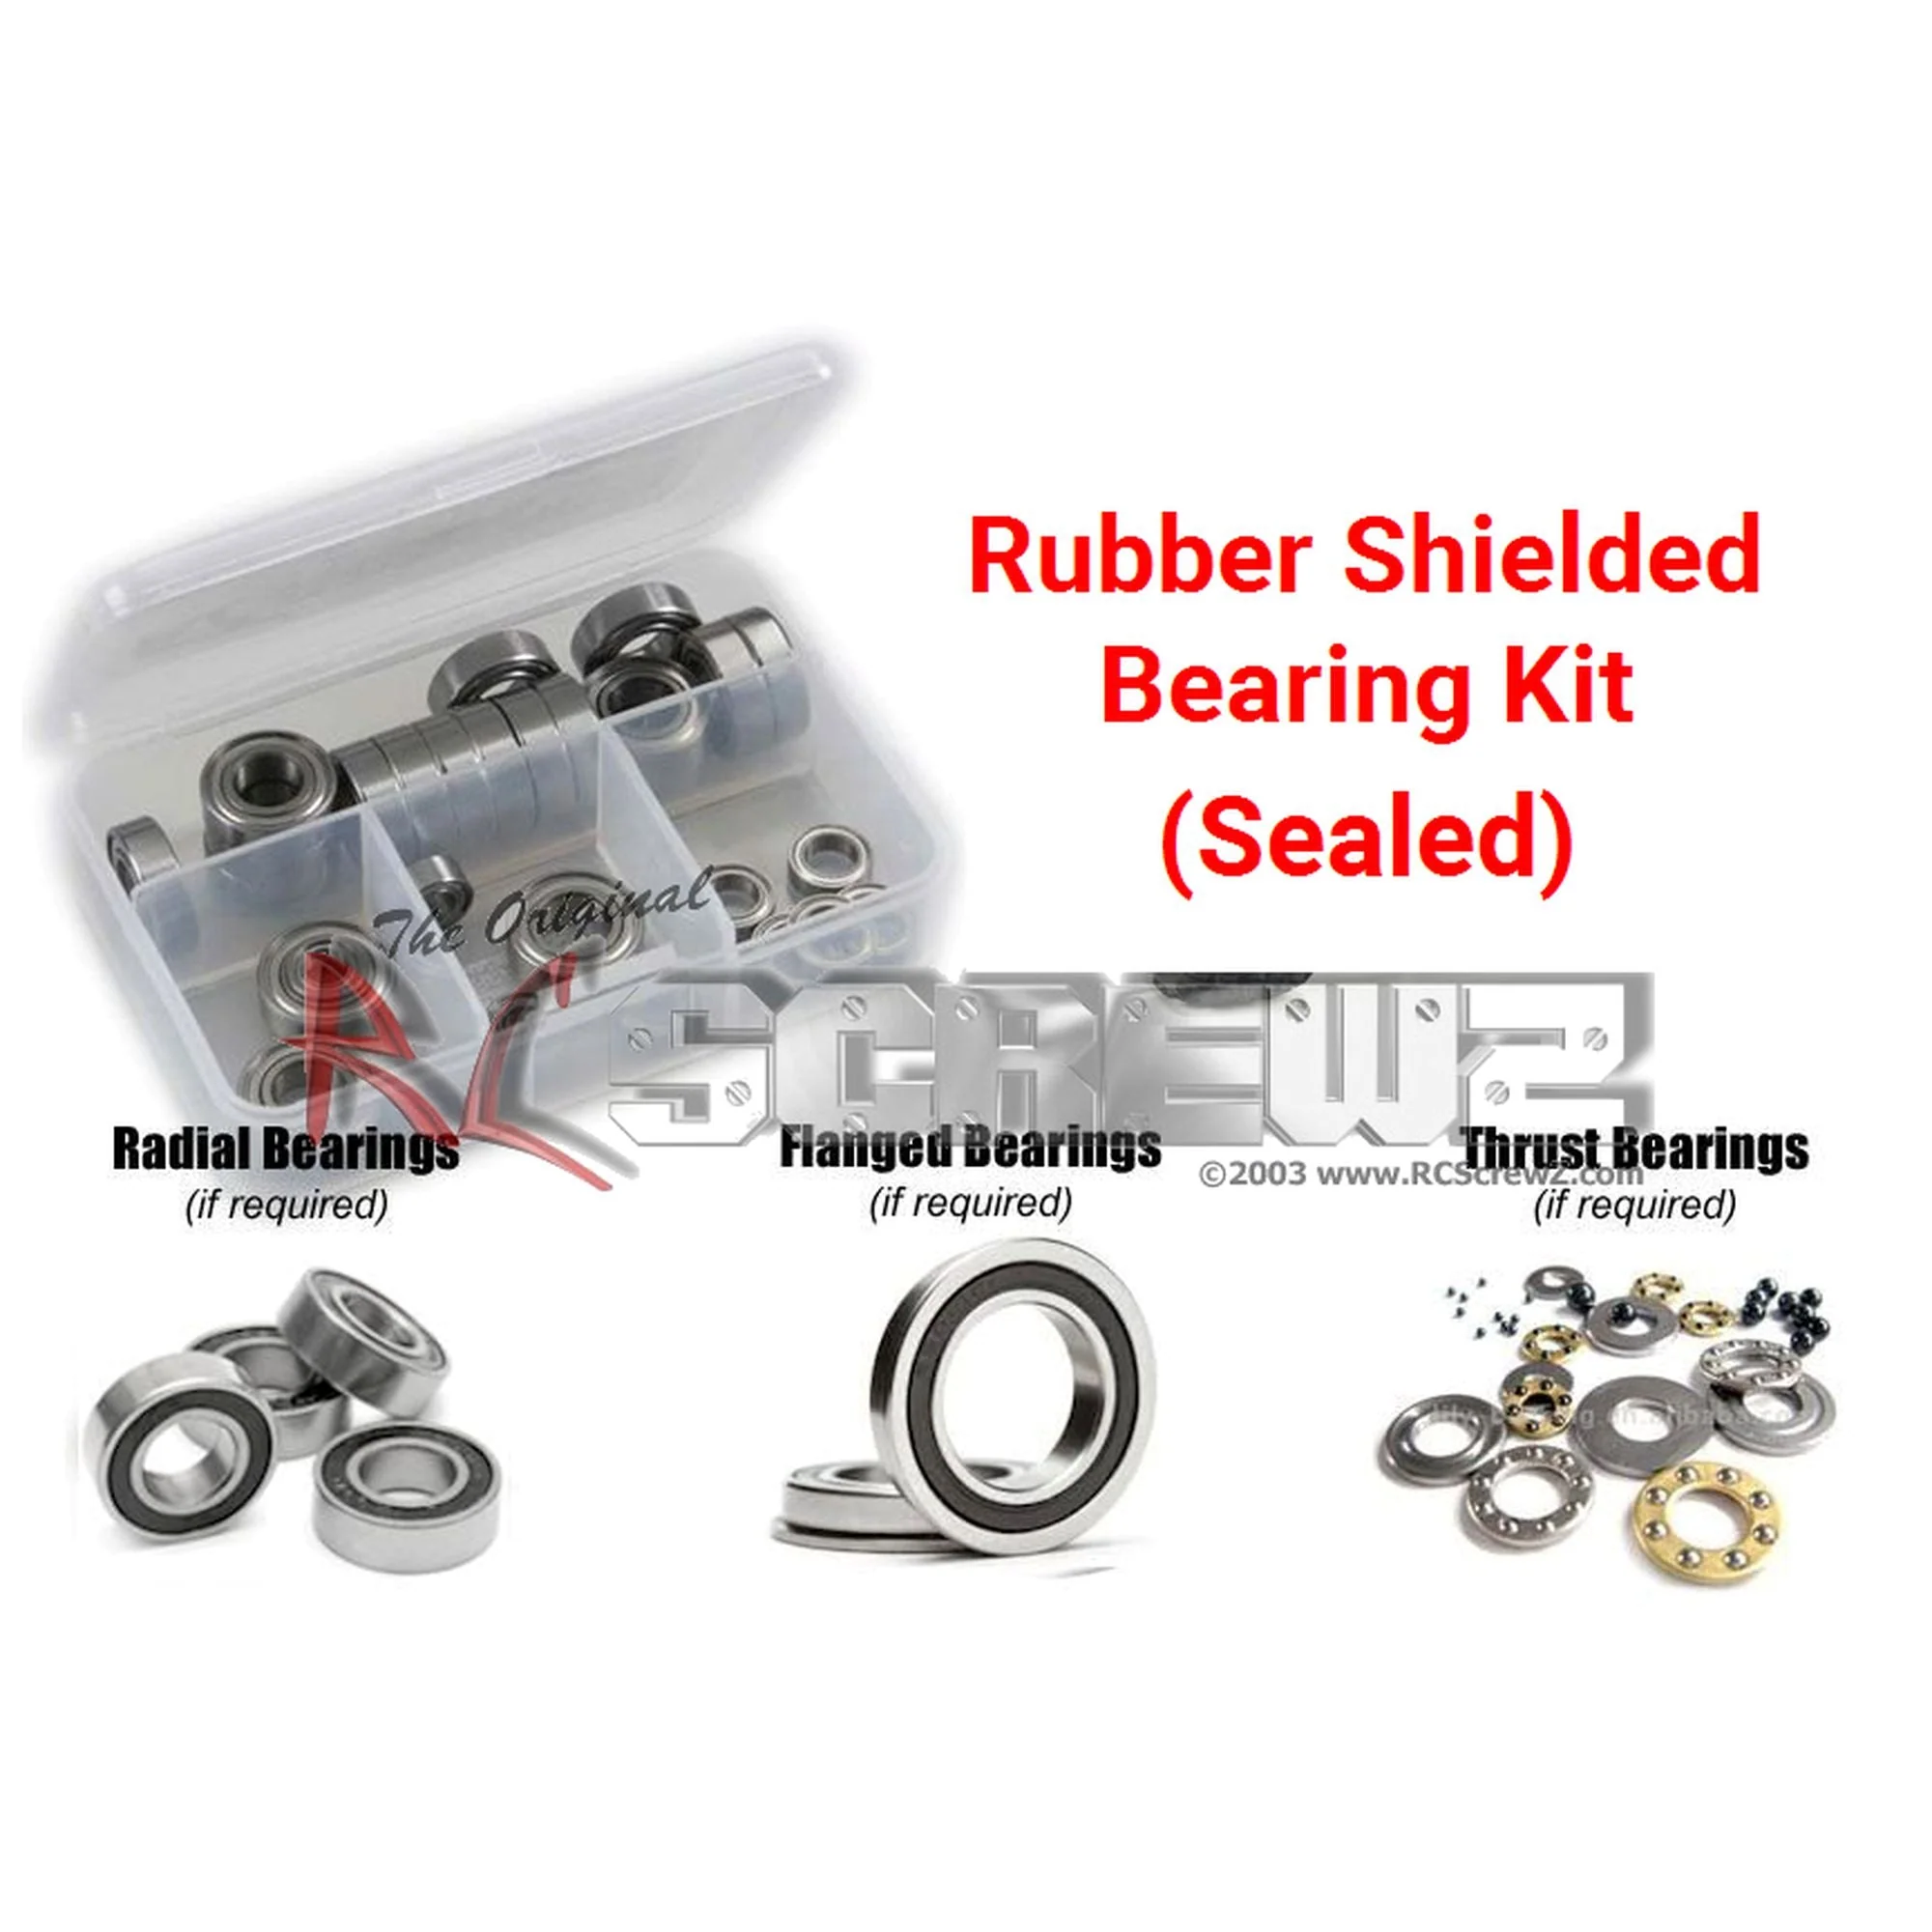 RCScrewZ Rubber Shielded Bearing Kit mug016r for Mugen Seiki MRX-4X 1/8th - Picture 1 of 12